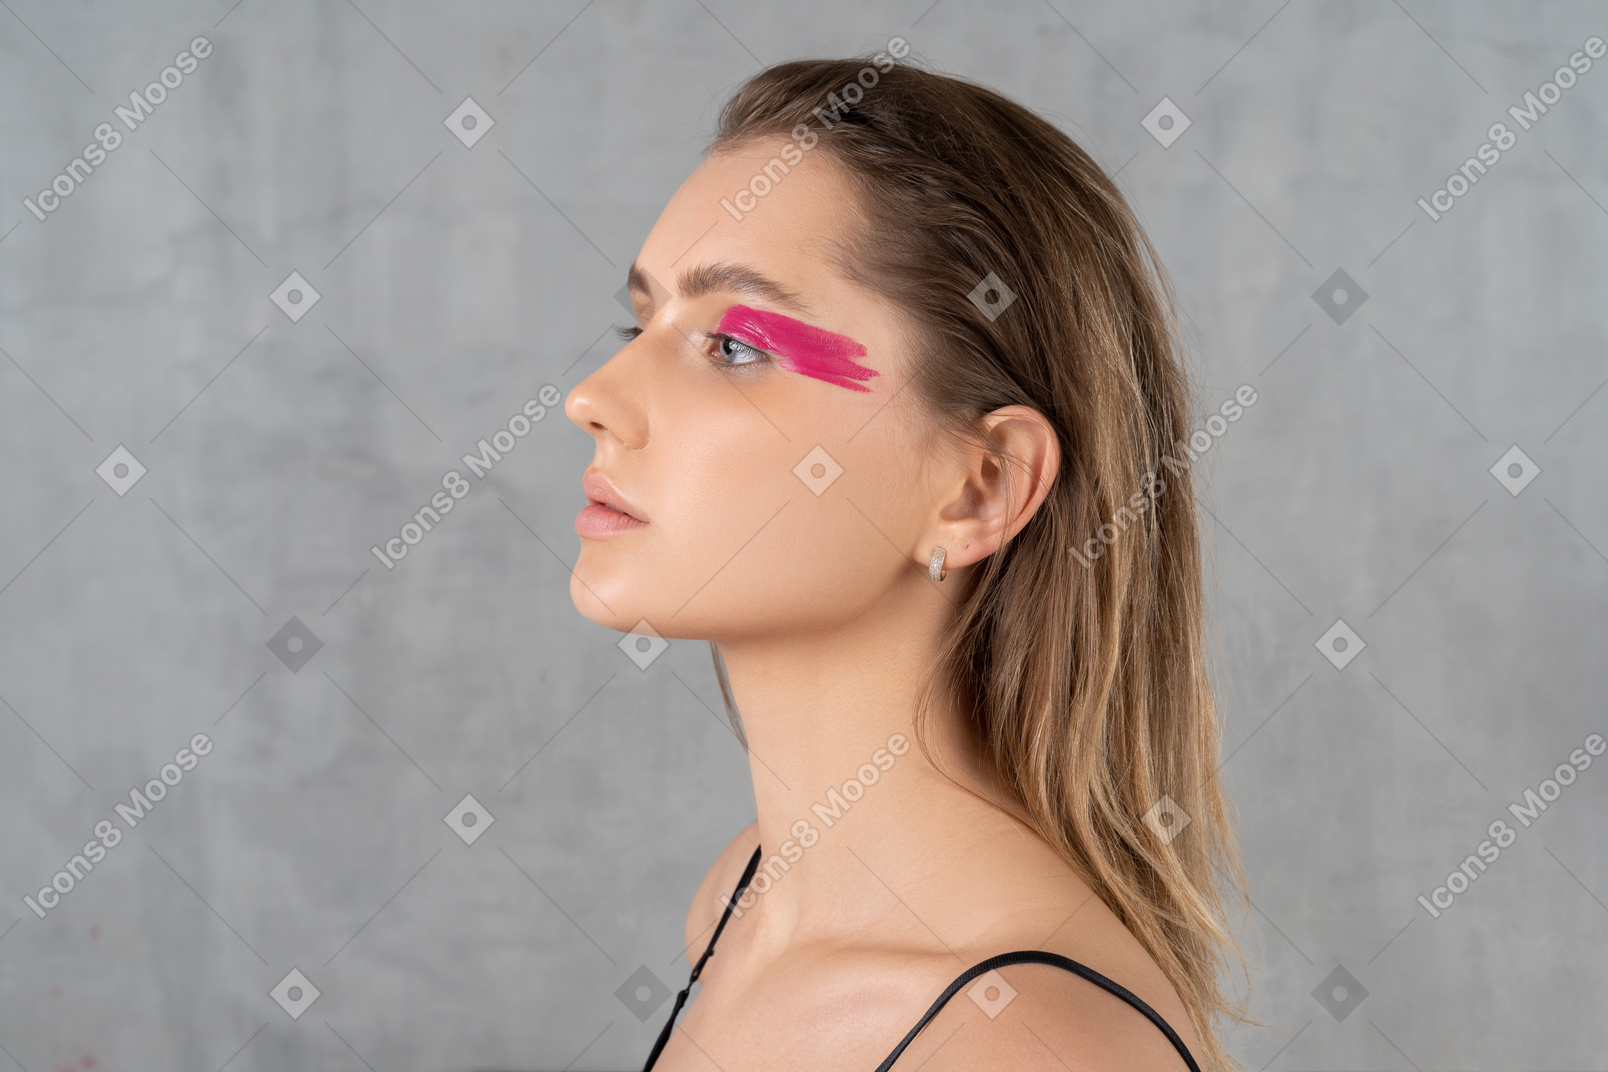 Headshot of a beautiful young woman with bright pink eye make-up